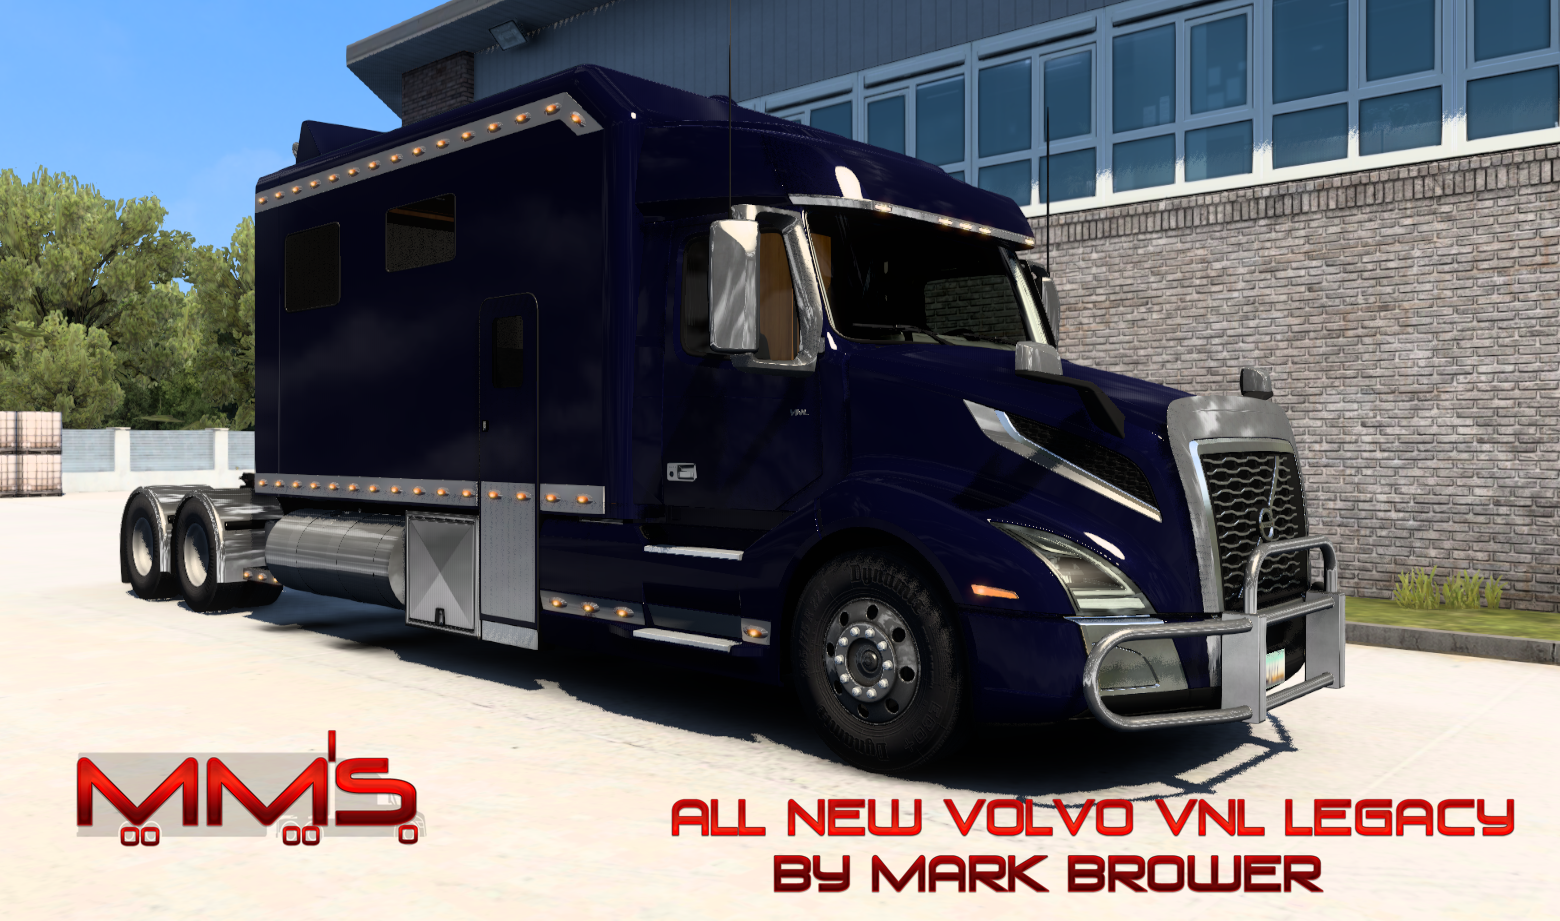 New Volvo VNL Legacy v0.52 Available Now!